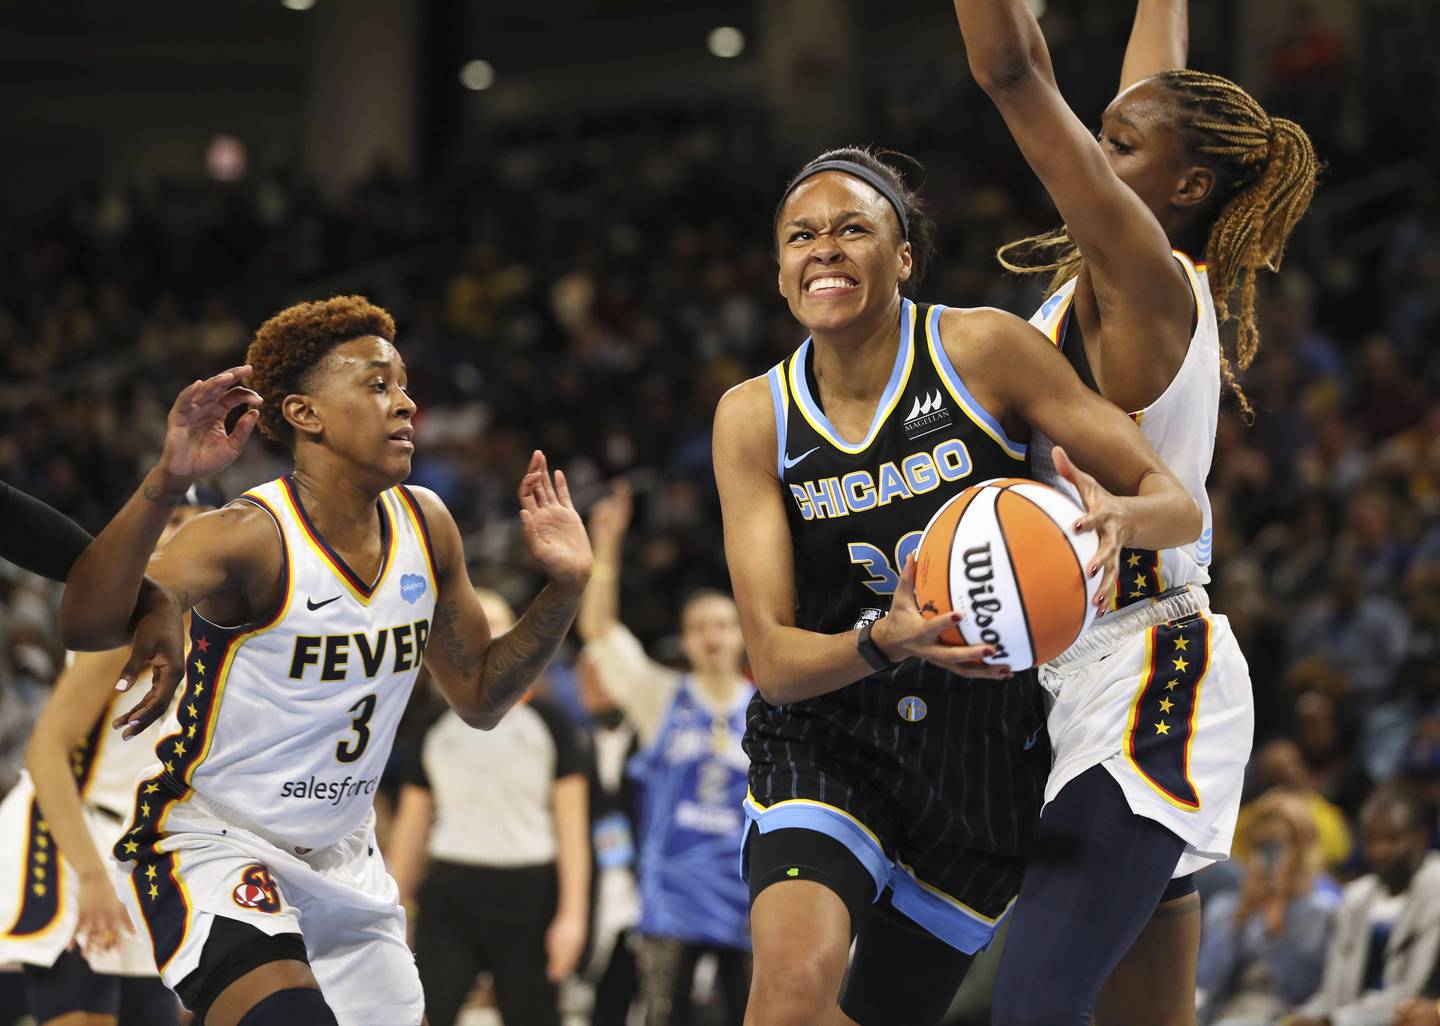 Chicago Sky forward Azurá Stevens drives past the Indiana Fever's Danielle Robinson (3) and Queen Egbo on May 24, 2022, at Wintrust Arena.